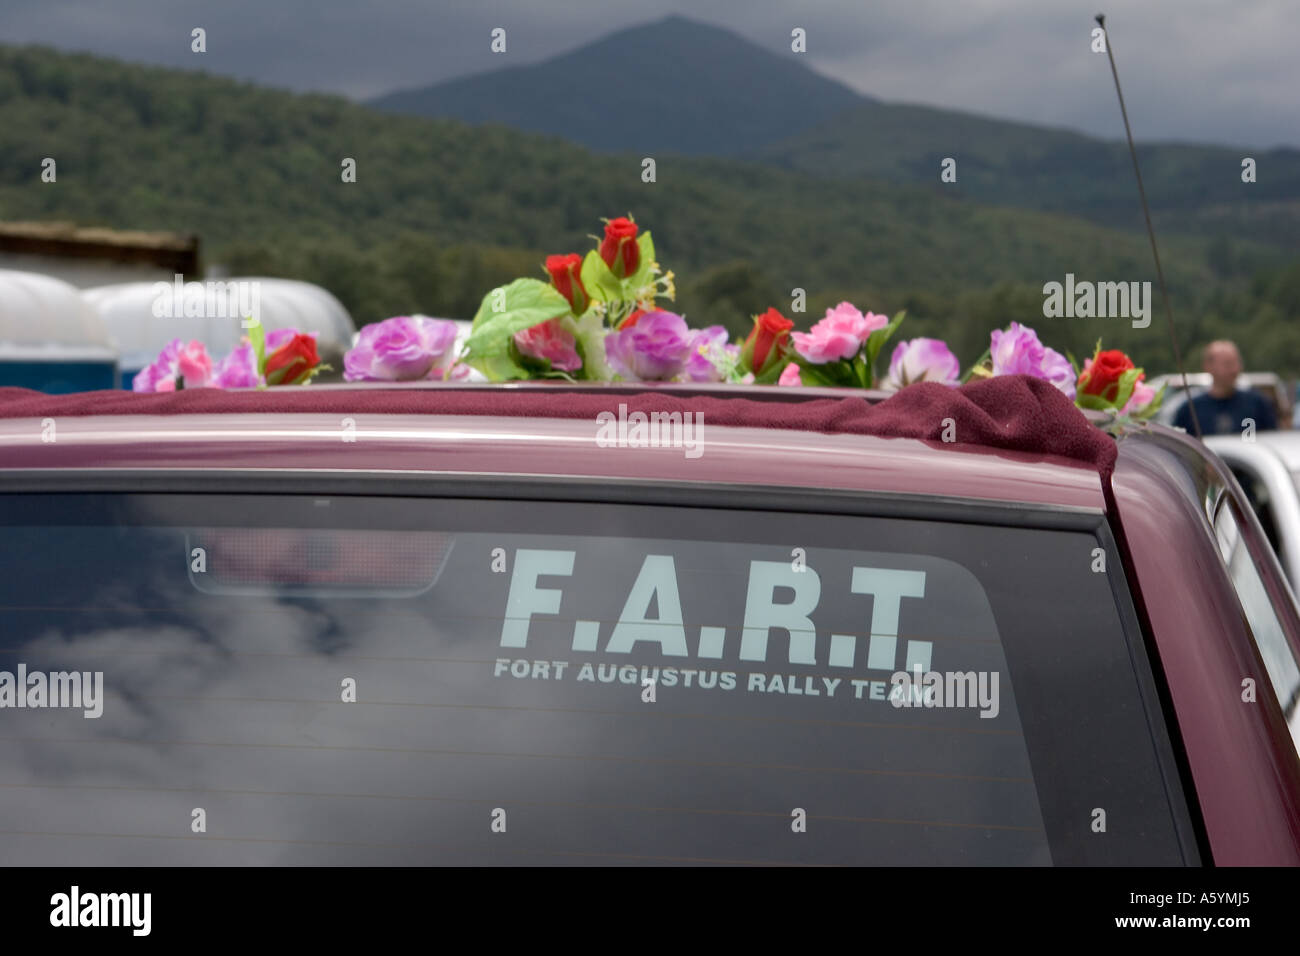 fart in Capitals F.A.R.T. the fart initials of the Fort Augustus Rally Team Letters displayed on Landrover, Scotland uk Stock Photo